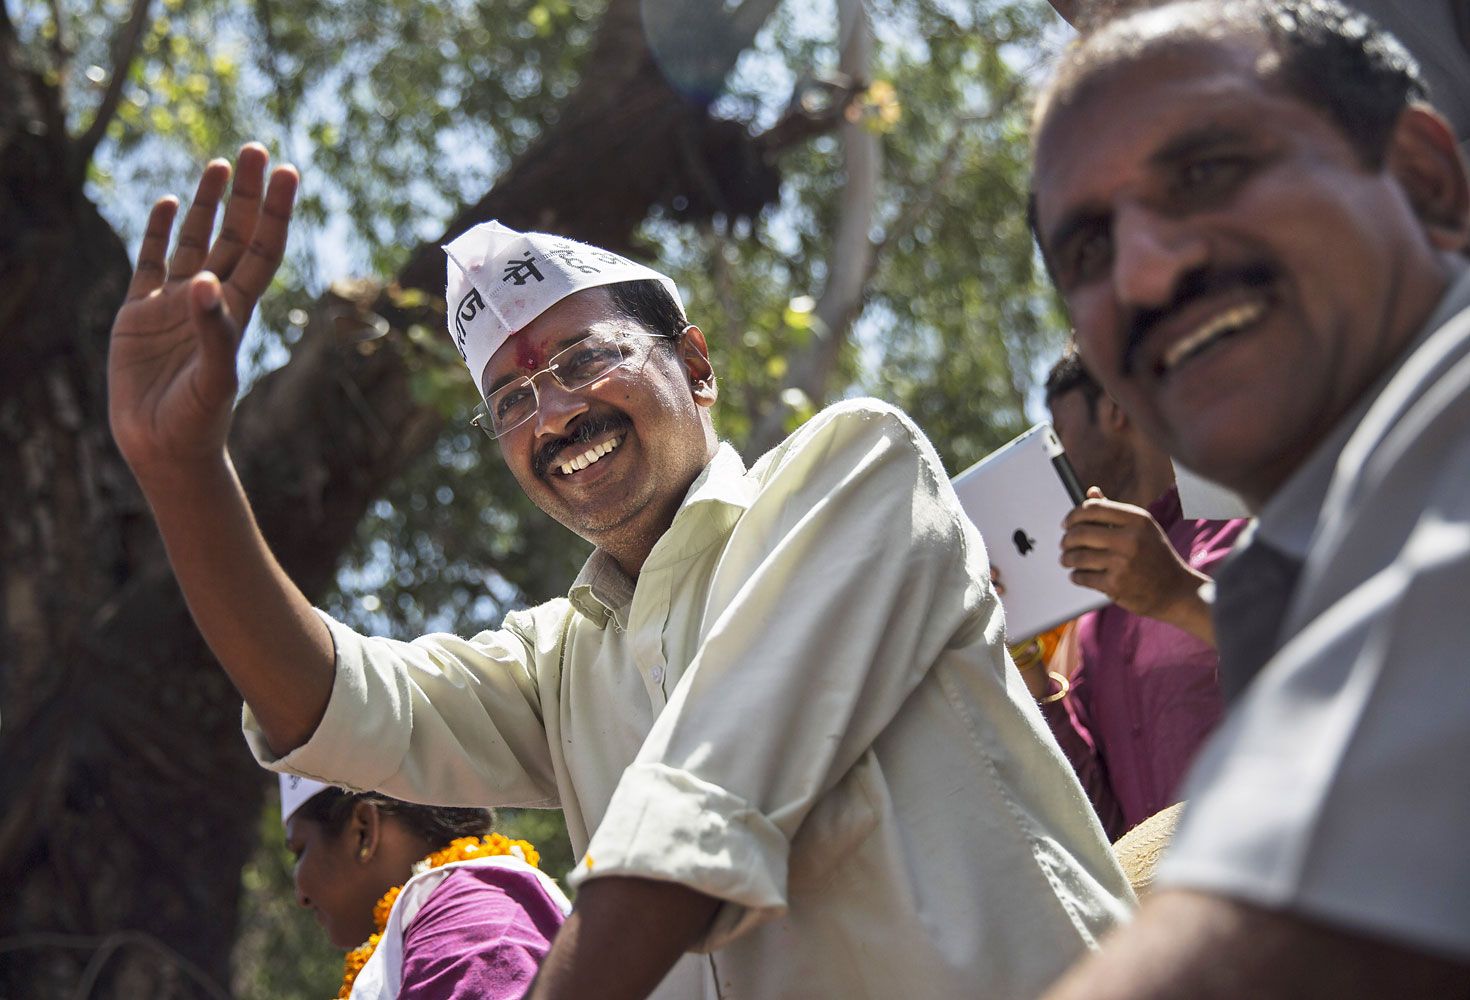 Leader of the AAP and anti-corruption activist  Arvind Kejriwal waves to supporters while campaigning on April 8, 2014 in New Delhi.